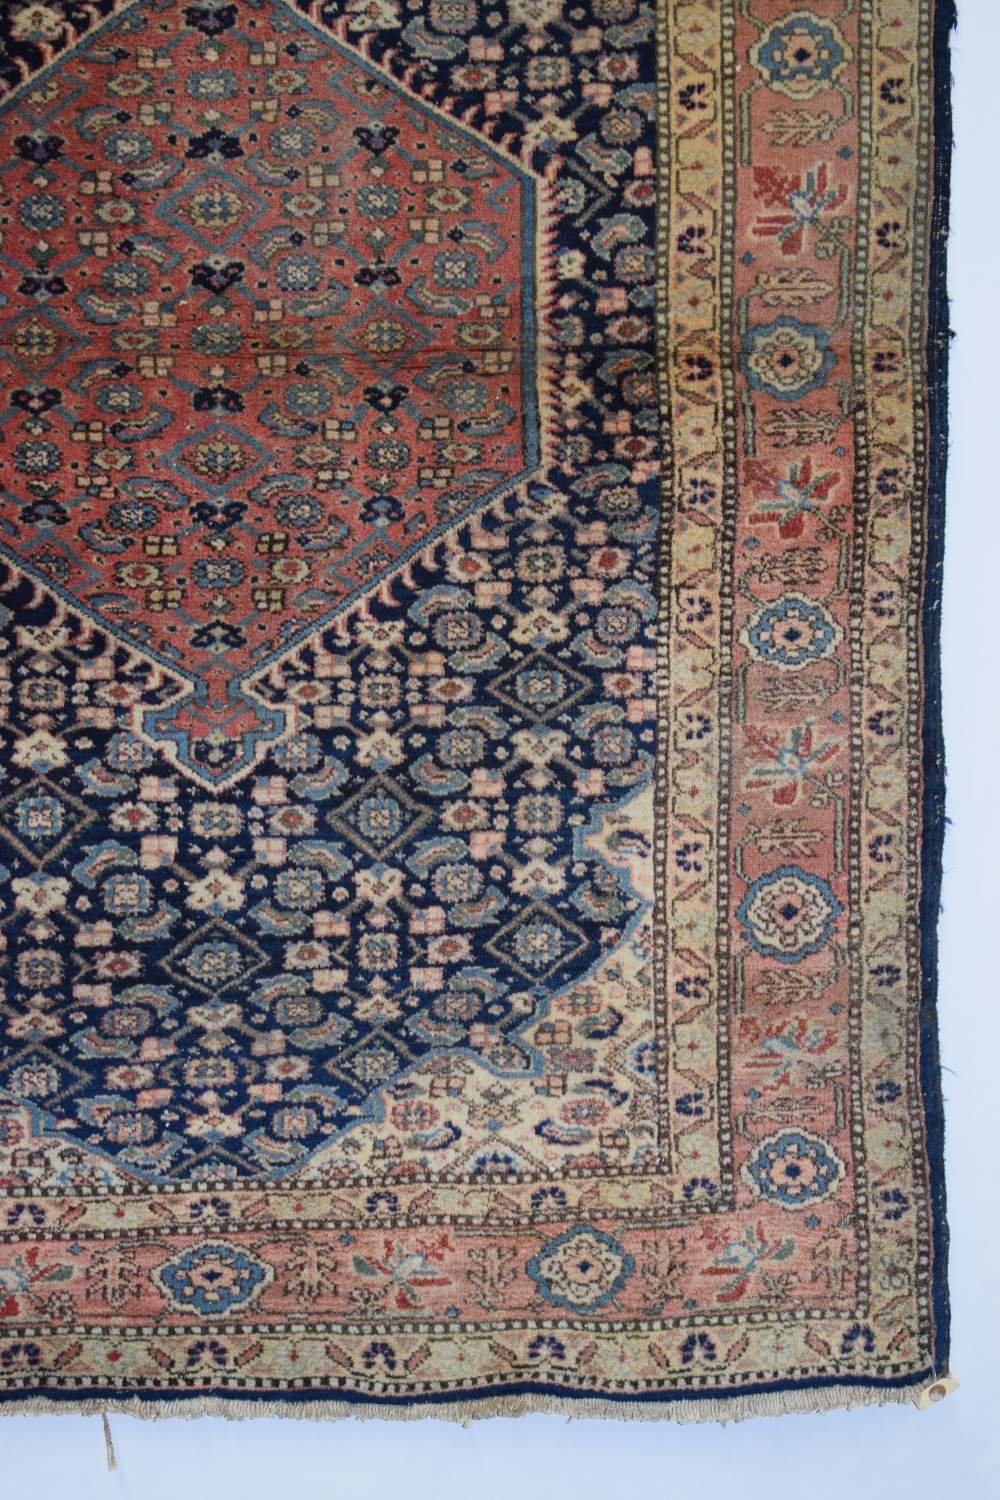 North west Persian rug, Ardabil or Tabriz district, circa 1950s, 5ft. 2in. X 3ft. 7in. 1.58m. X 1. - Image 2 of 8